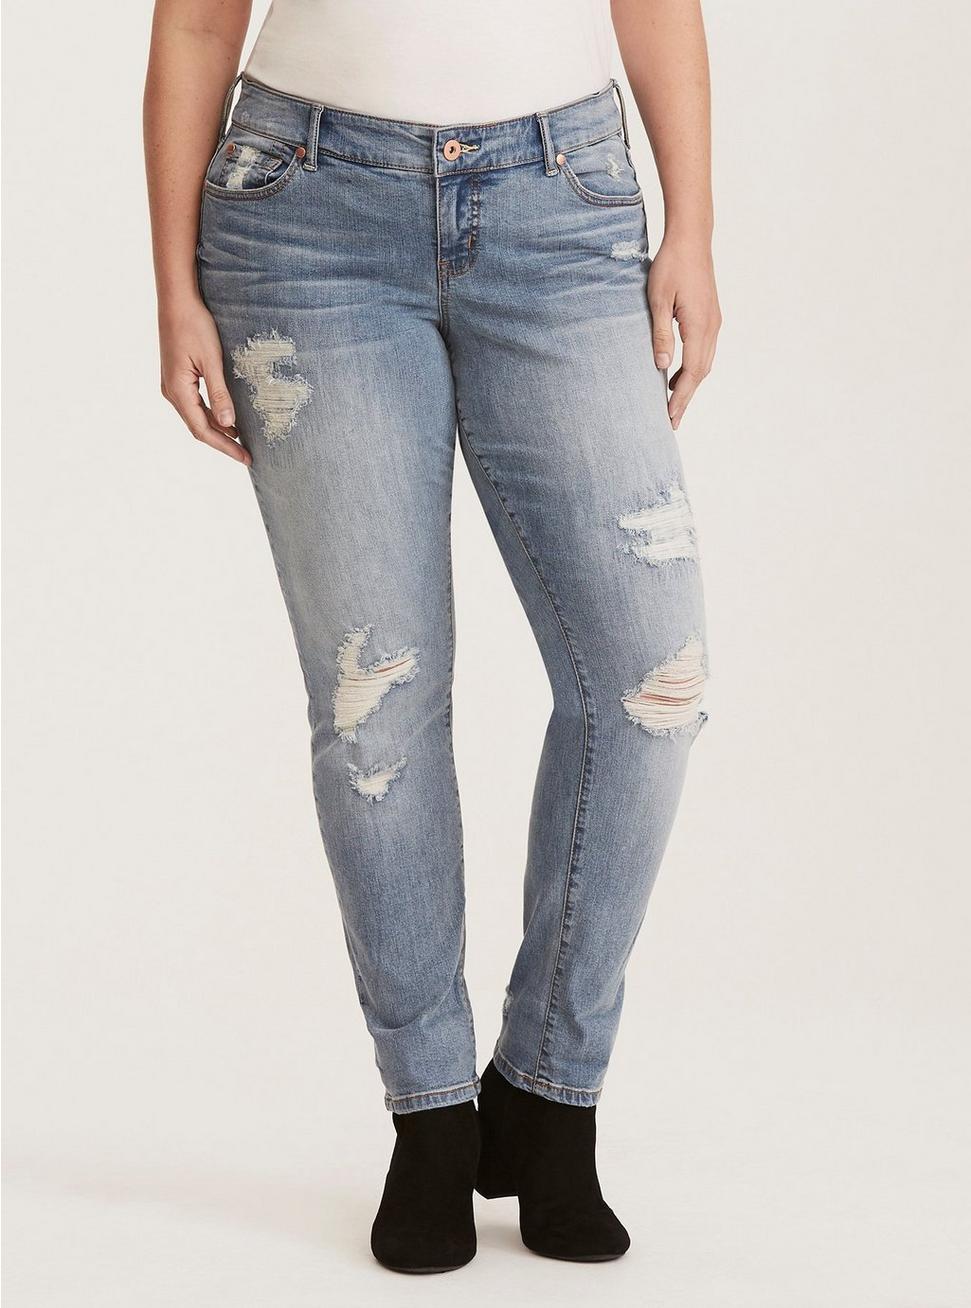 Plus Size - Boyfriend Jeans - Light Wash with Ripped & Repaired ...